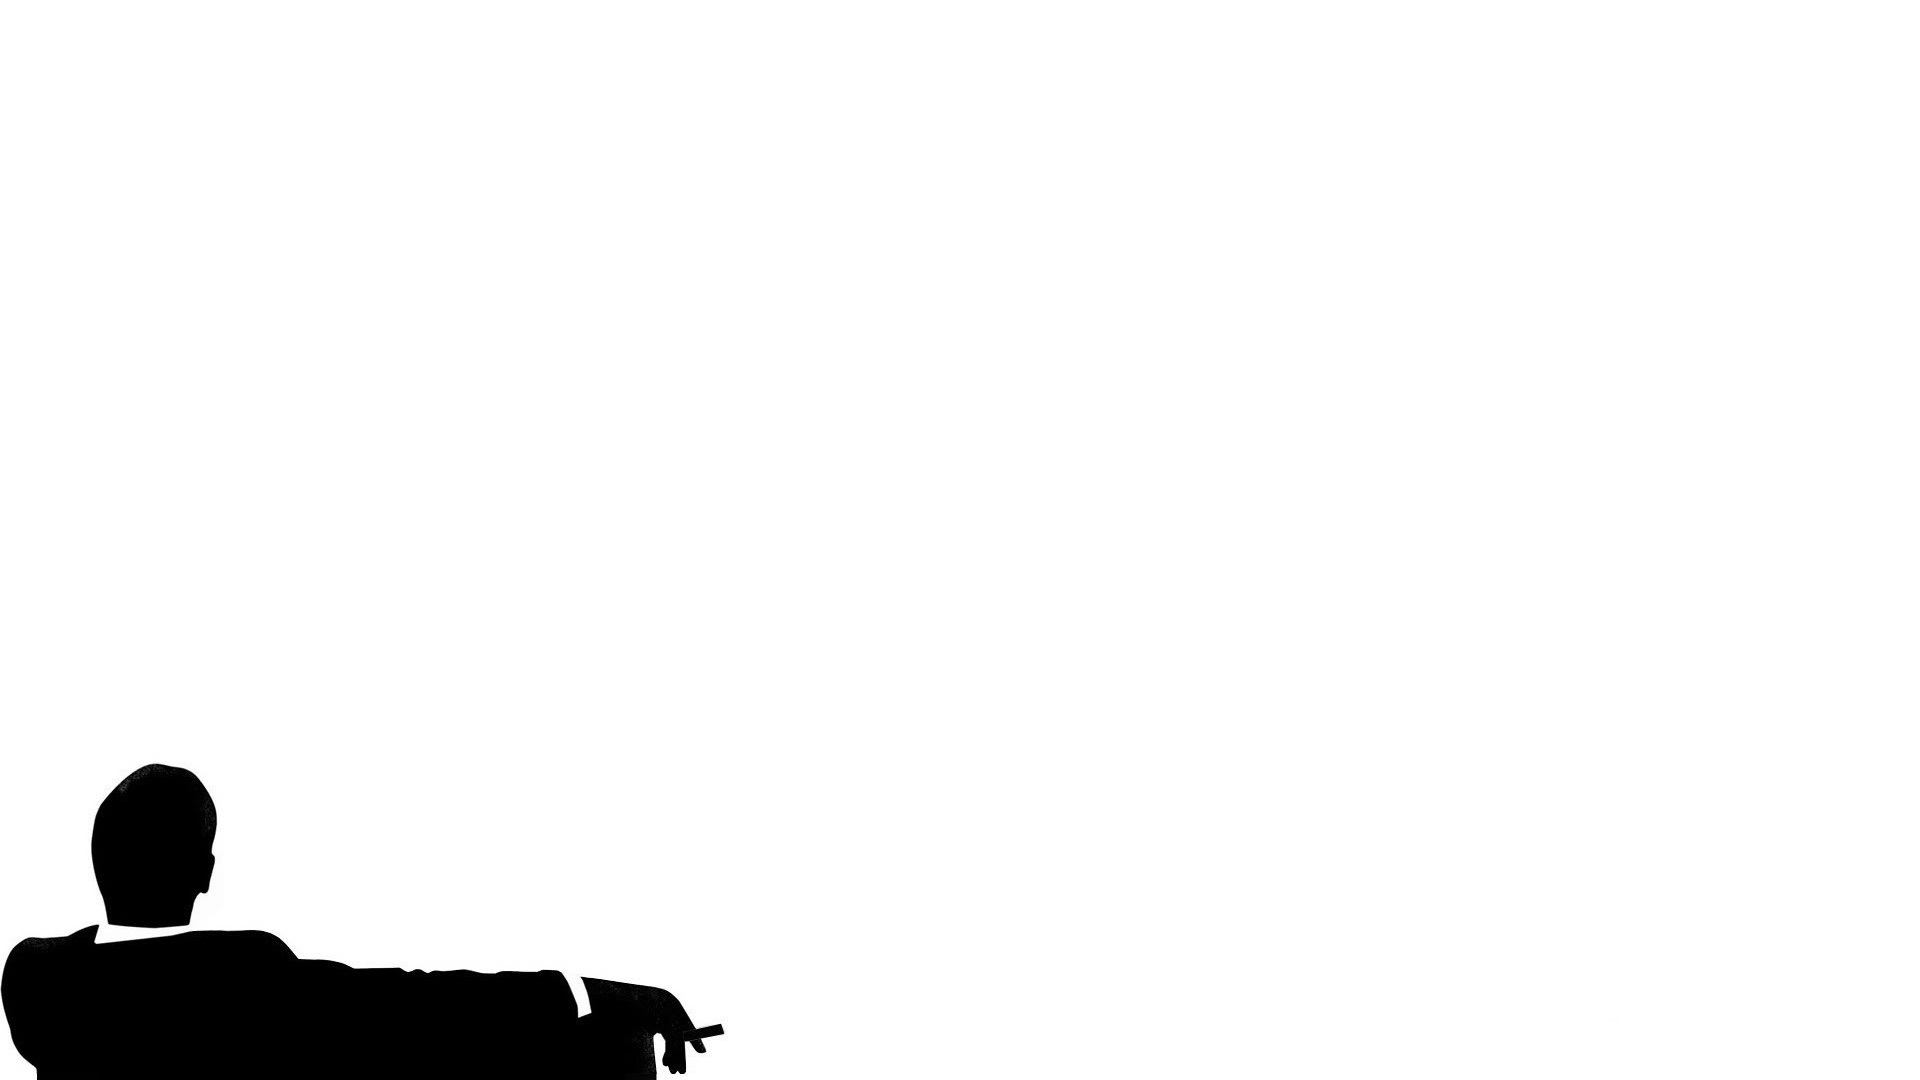 Mad Men TV Series Smoking Cigarettes Don Draper Silhouette Relaxing Minimalism Simple Background Whi 1920x1080